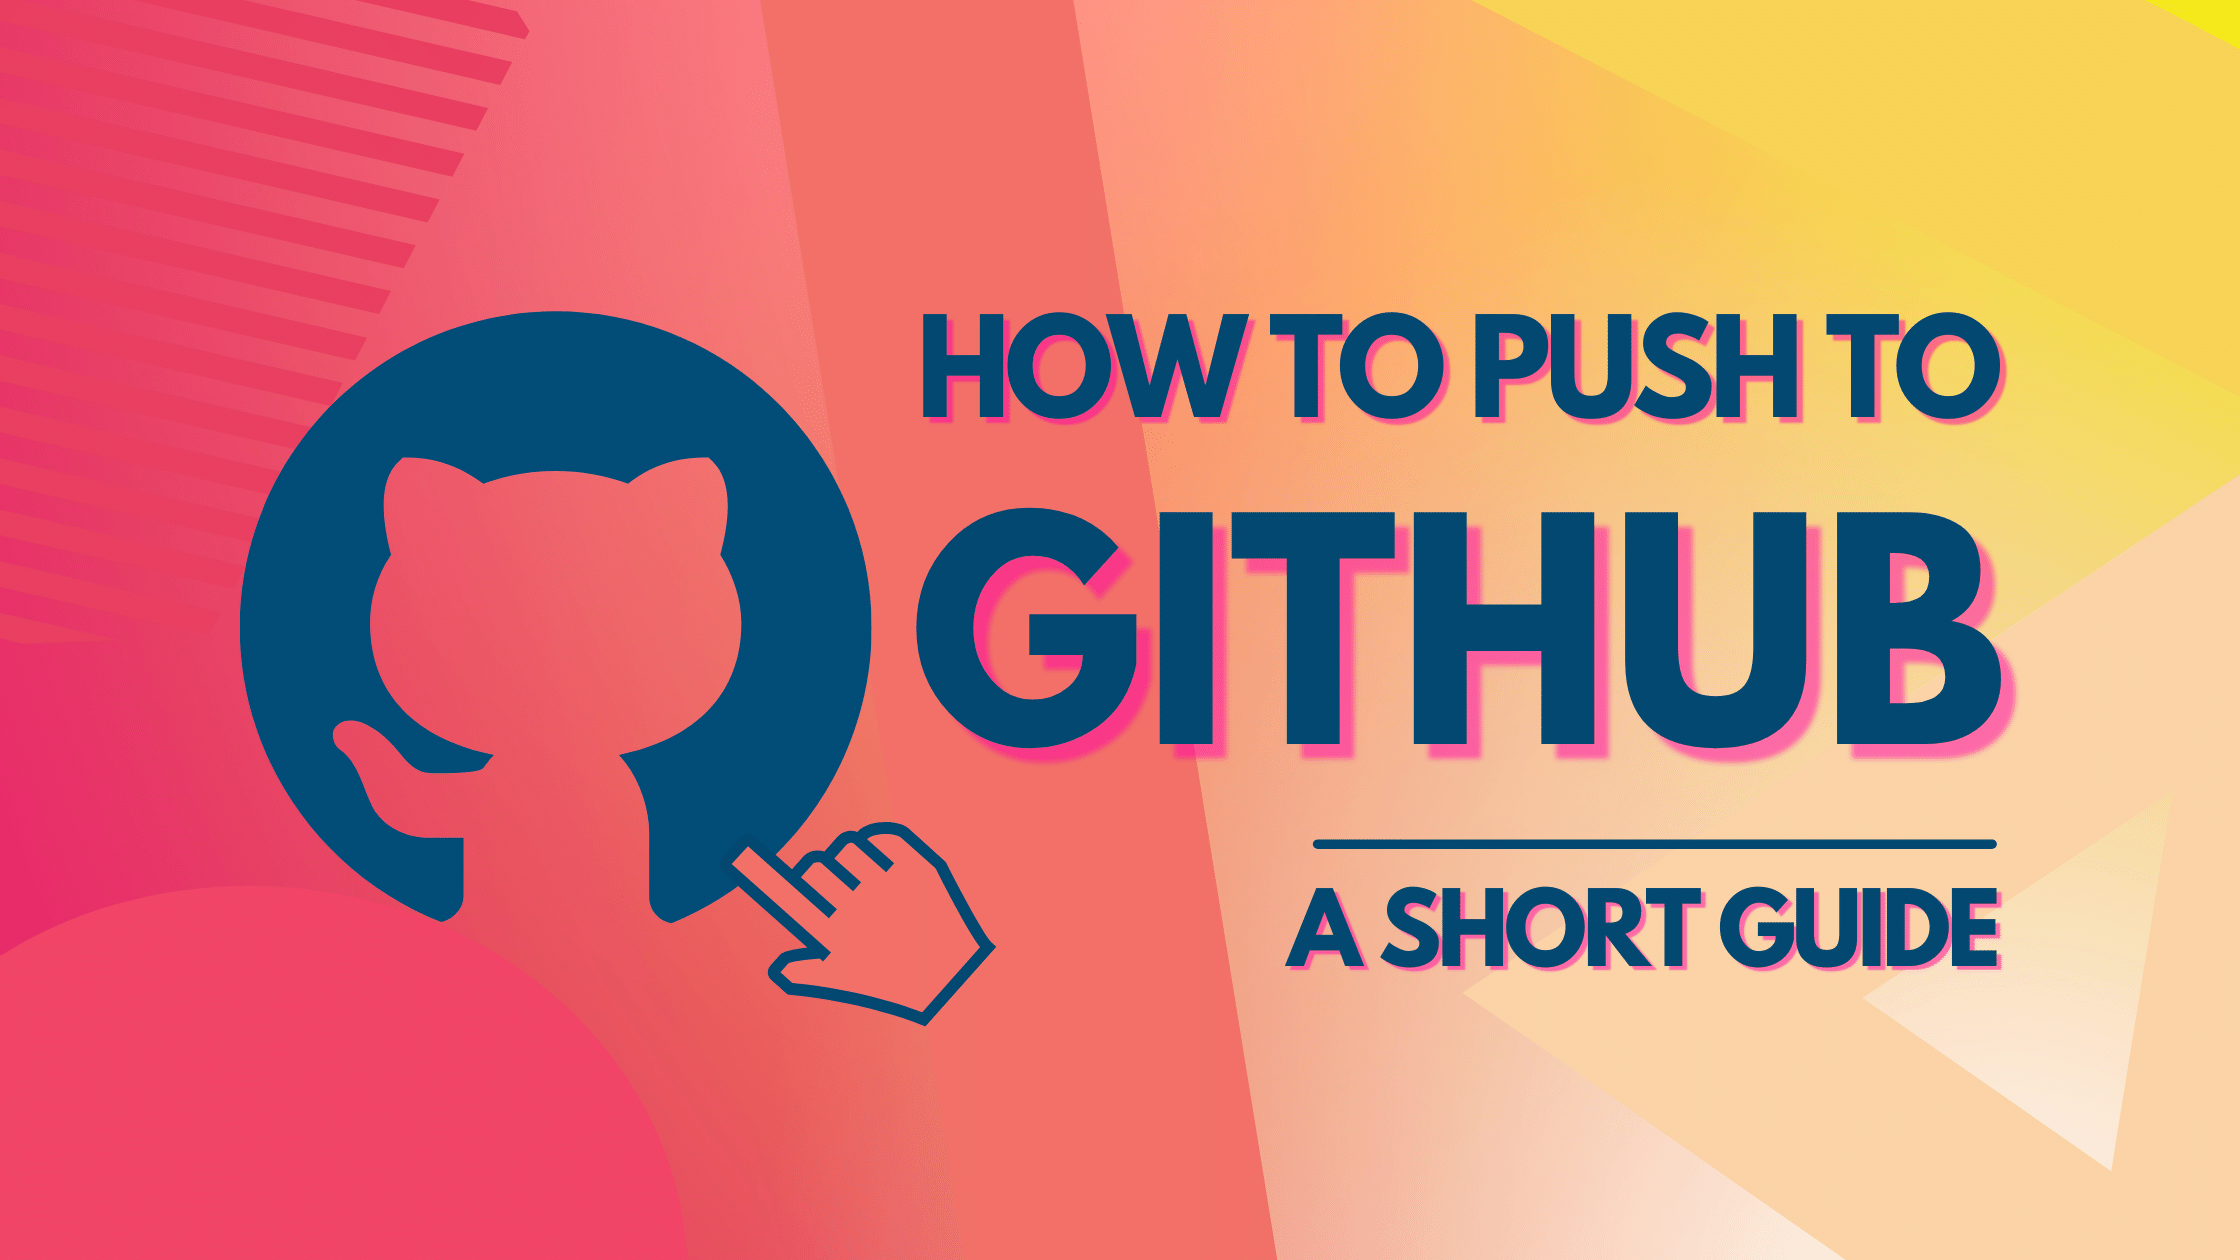 How to Push to GitHub: A Short Guide